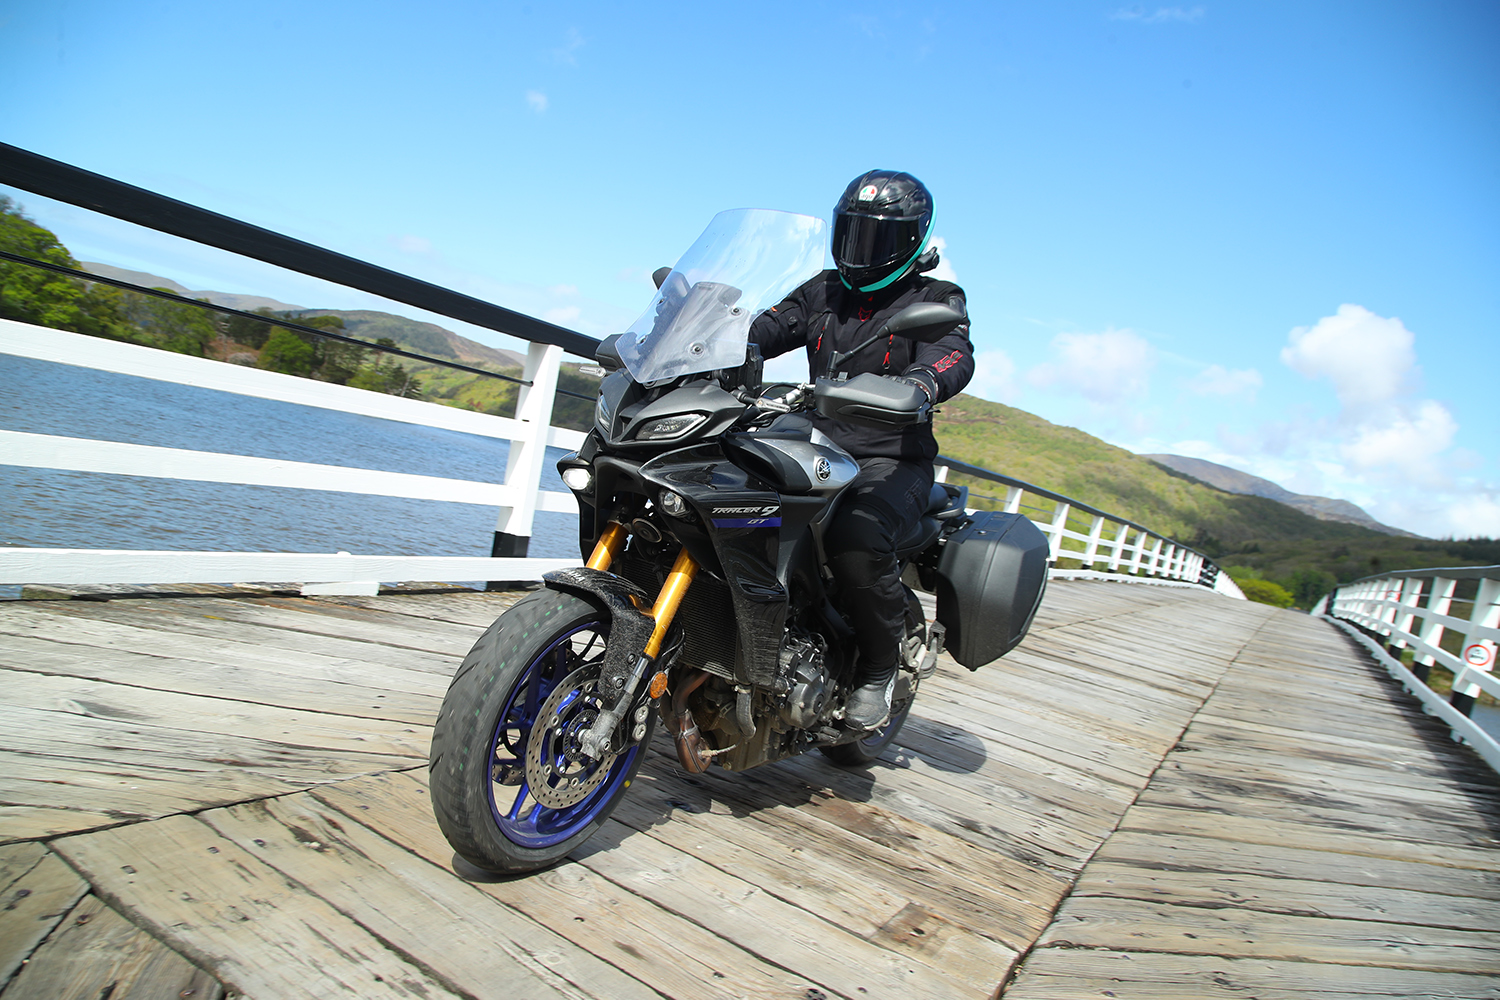 Taking the Yamaha Tracer 9 GT (2021) for a tour of Wales